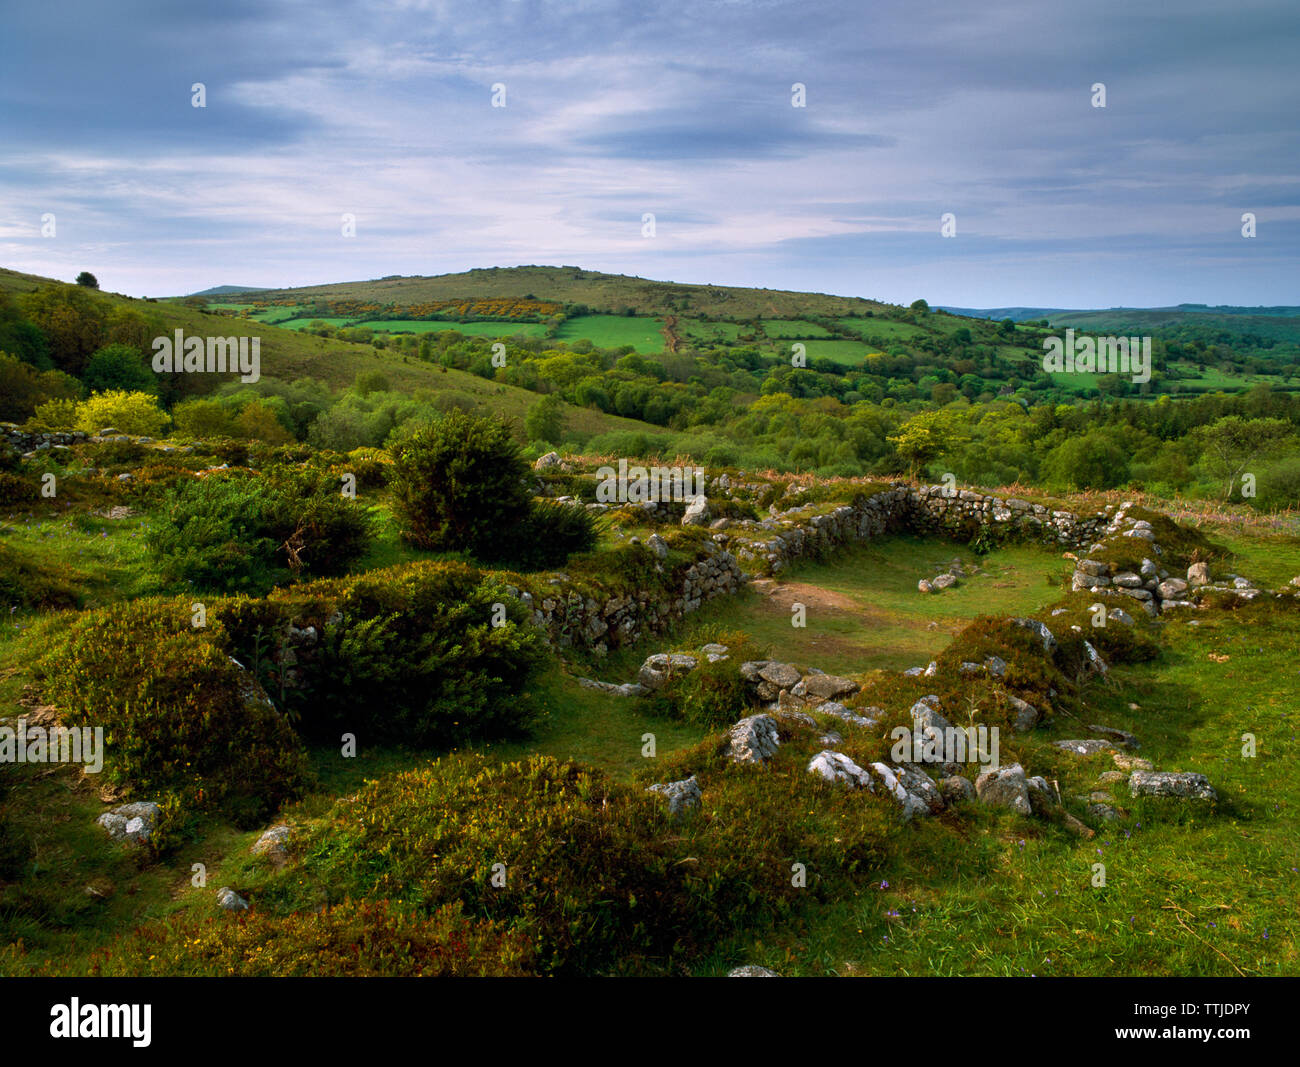 View N of one of the four C13th Dartmoor longhouses built of granite boulders at Hound Tor Deserted Medieval Village, Devon, UK. Stock Photo